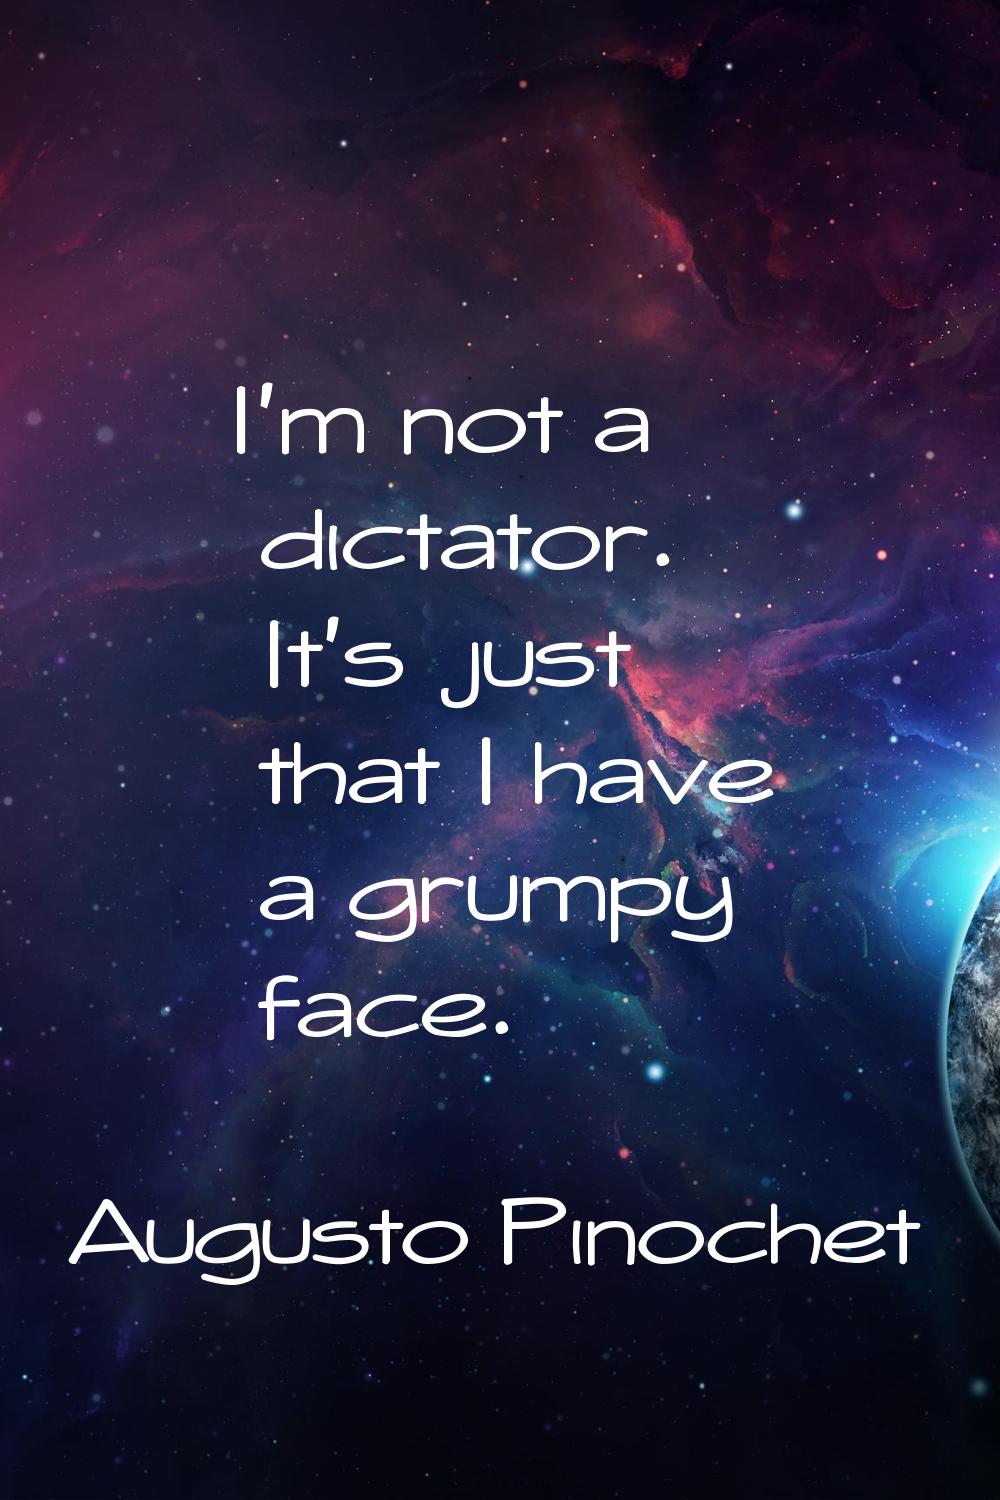 I'm not a dictator. It's just that I have a grumpy face.